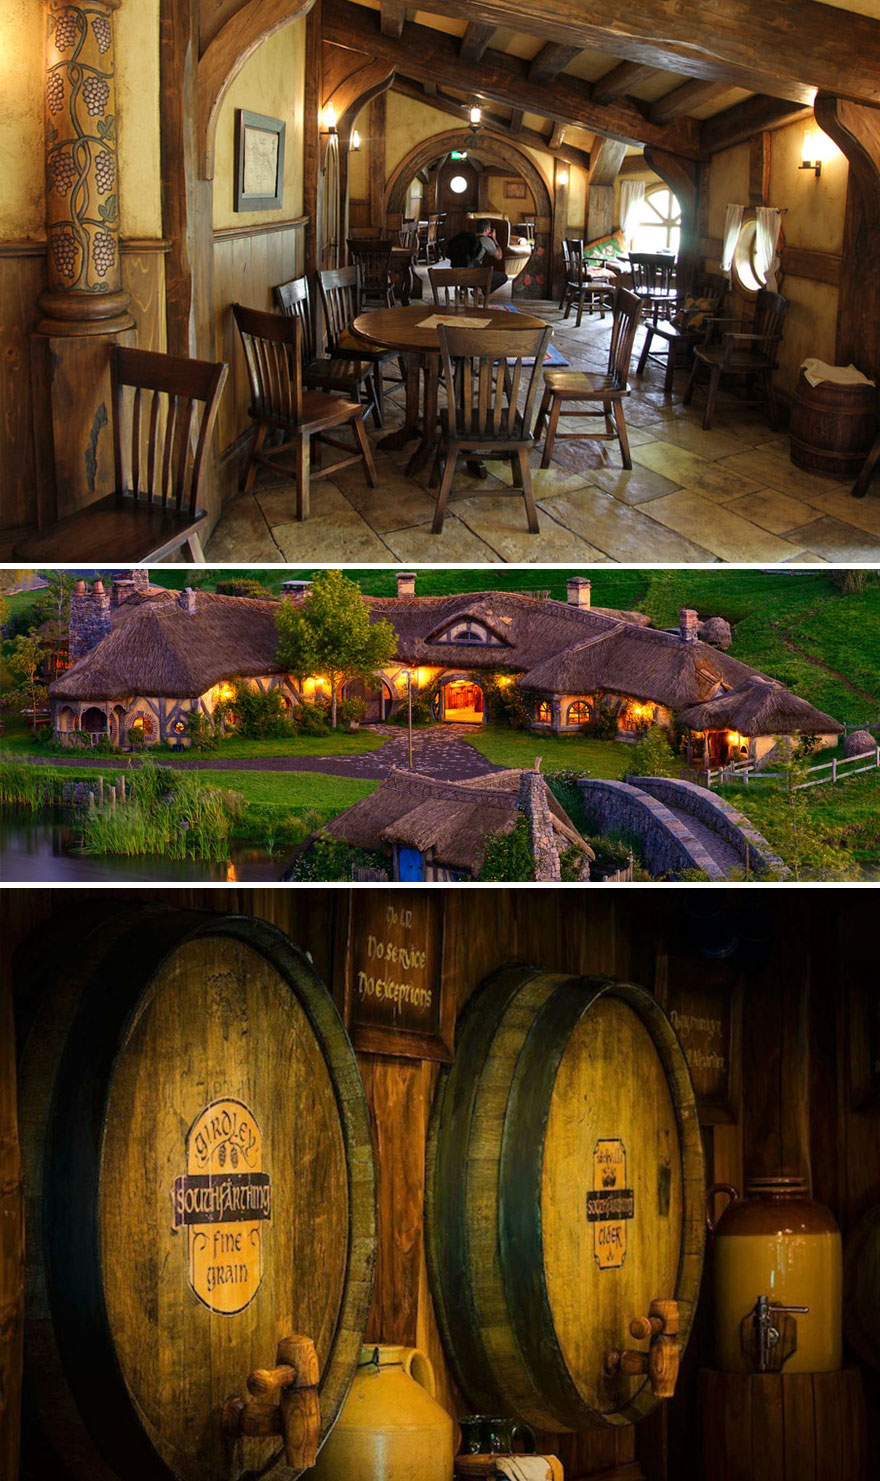 "A Place To Drink, A Place To Meet, A Place To Rest Your Hairy Feet." The Green Dragon Pub In Hobbiton (New Zealand) Is A Perfect Place For A Real LOTR Fan